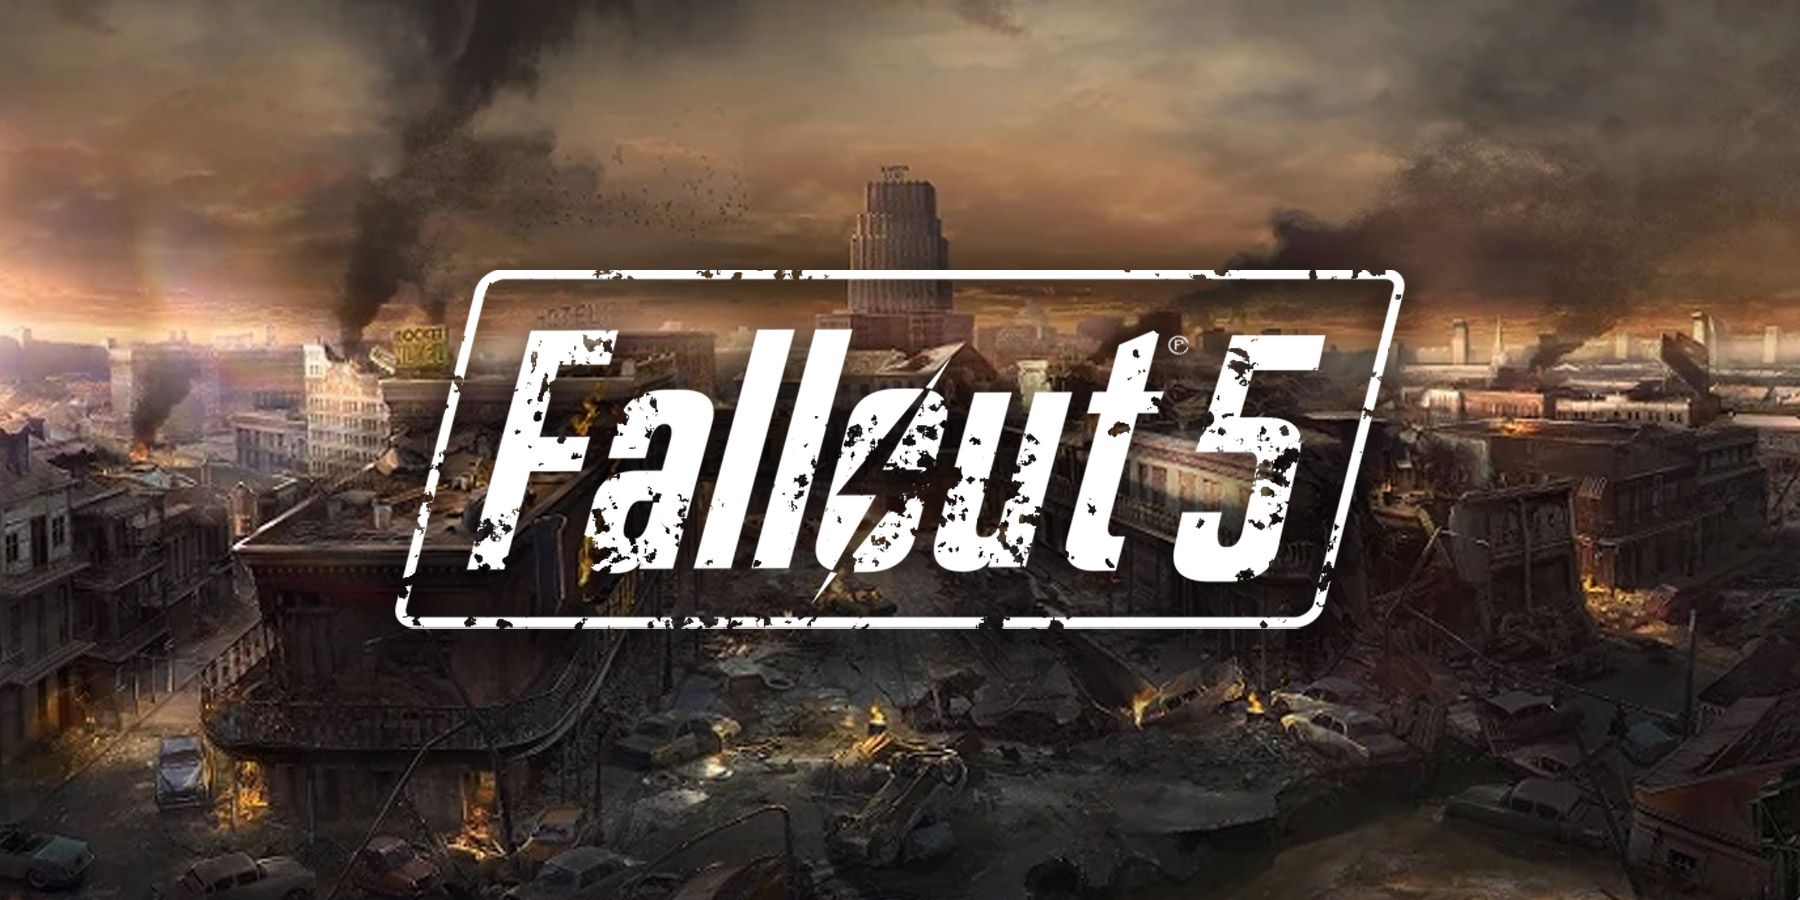 microsoft, setting fallout 5 in new orleans would kill two birds with one stone